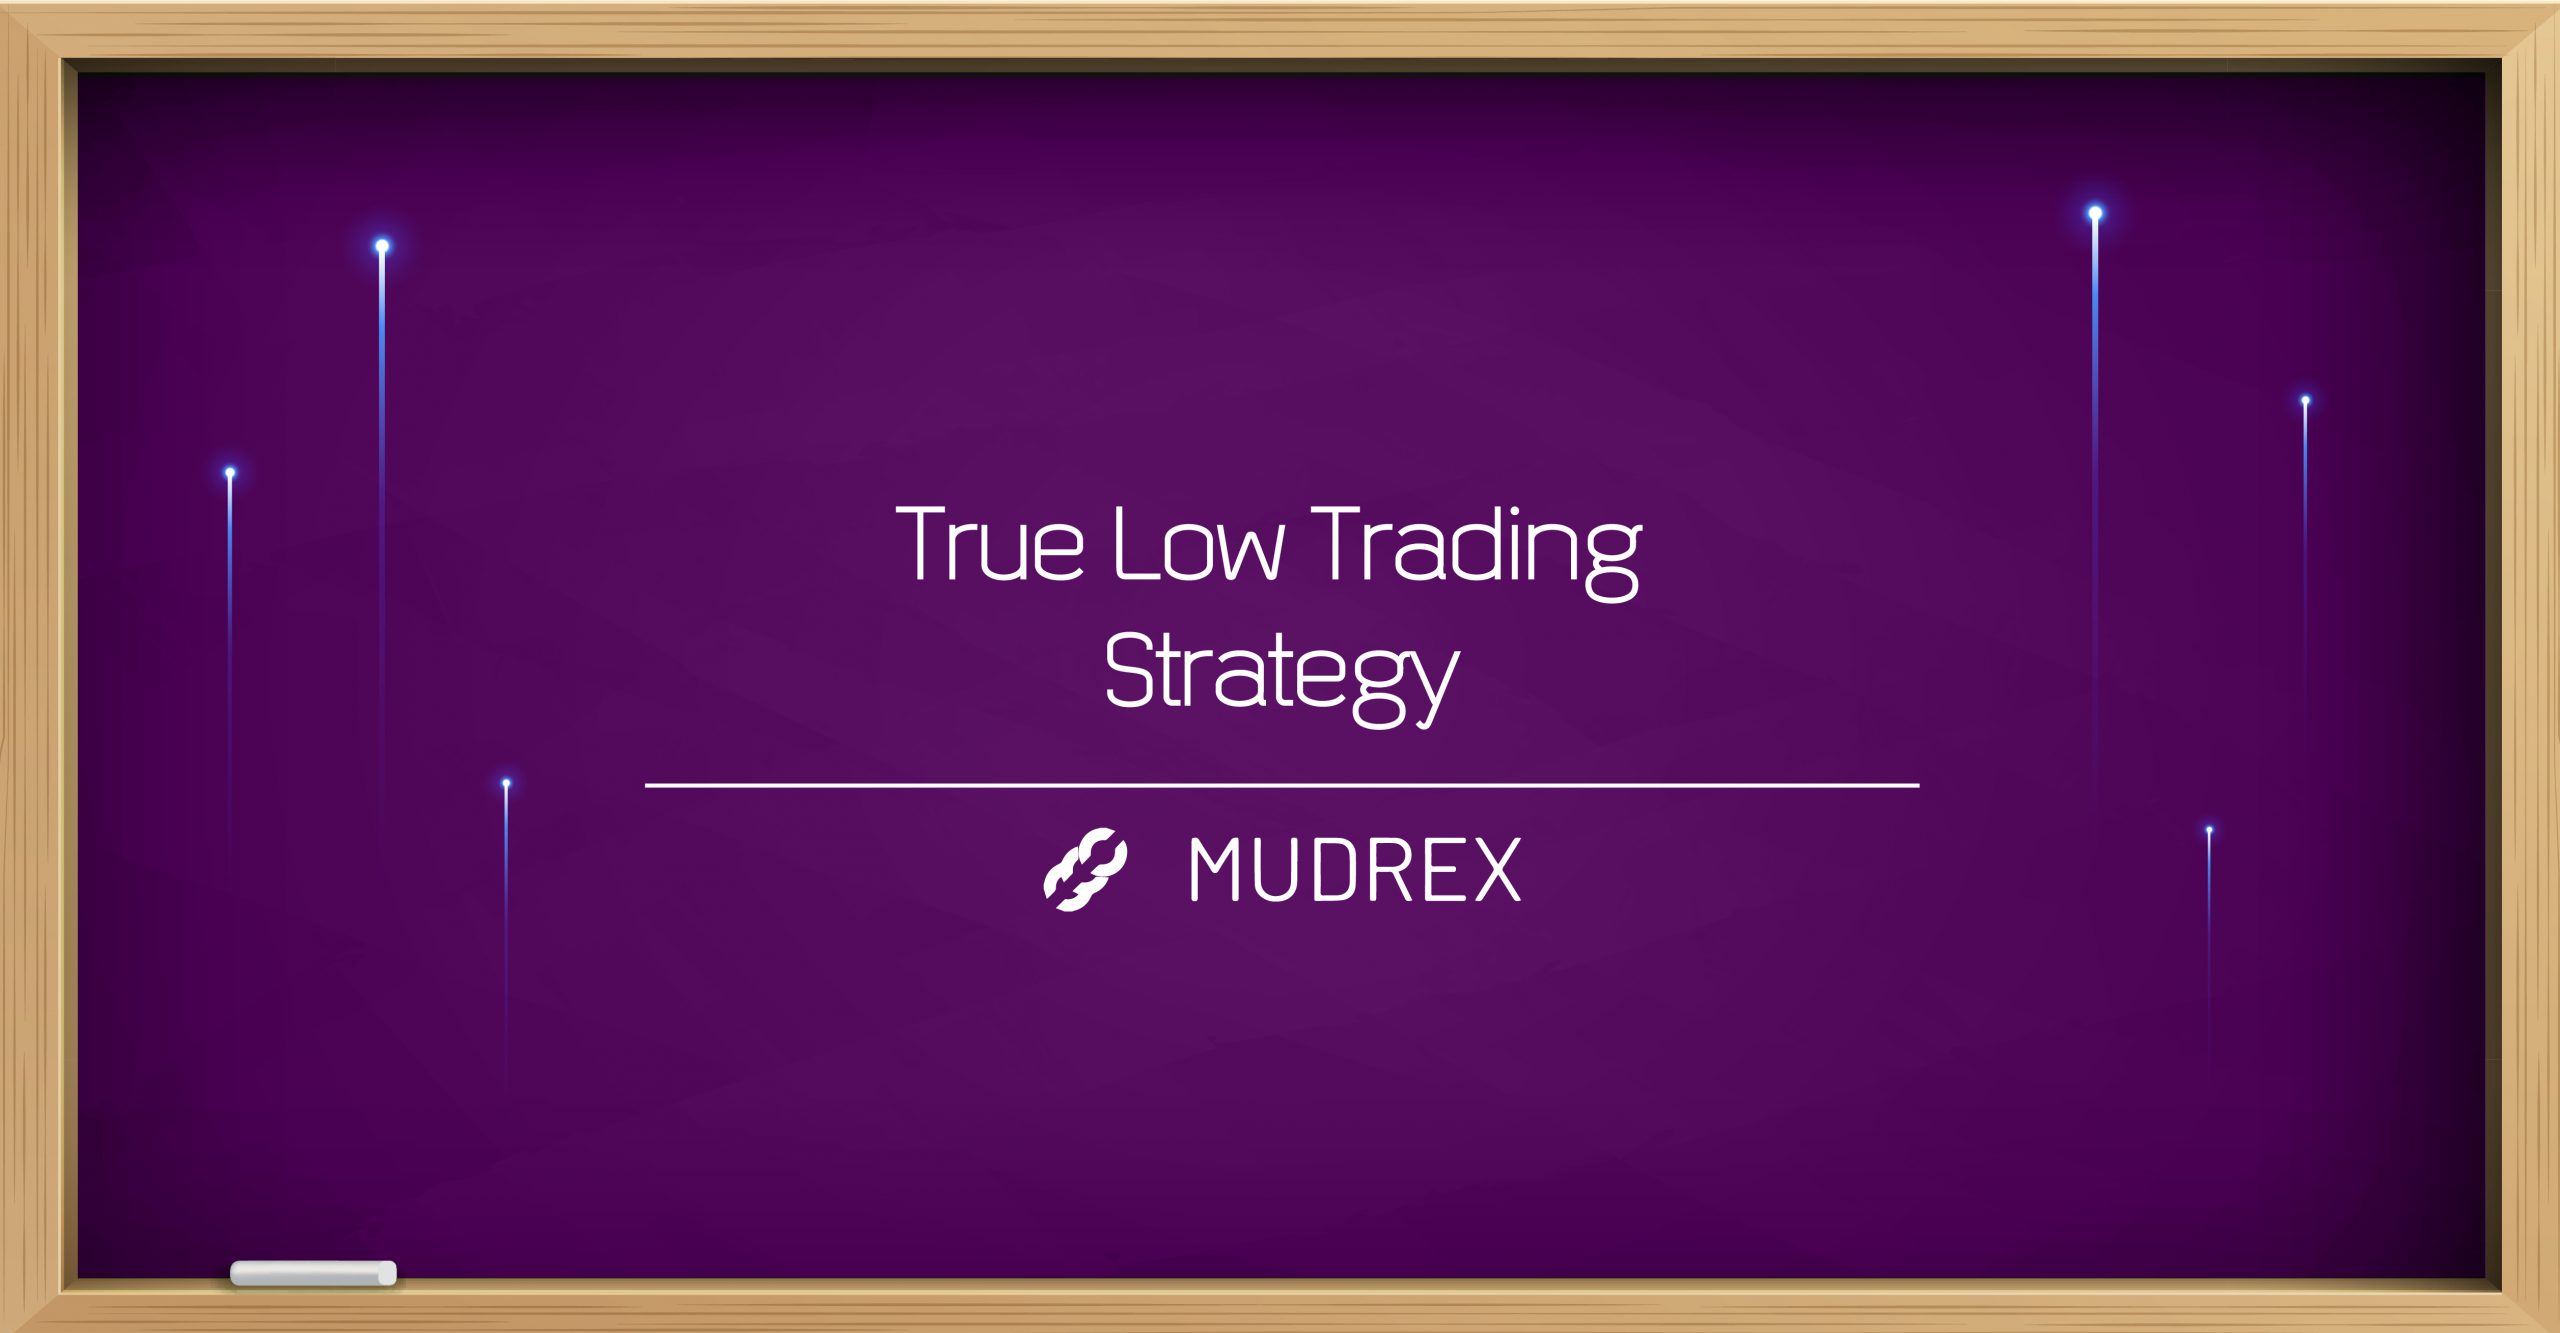 True Low Trading Strategy